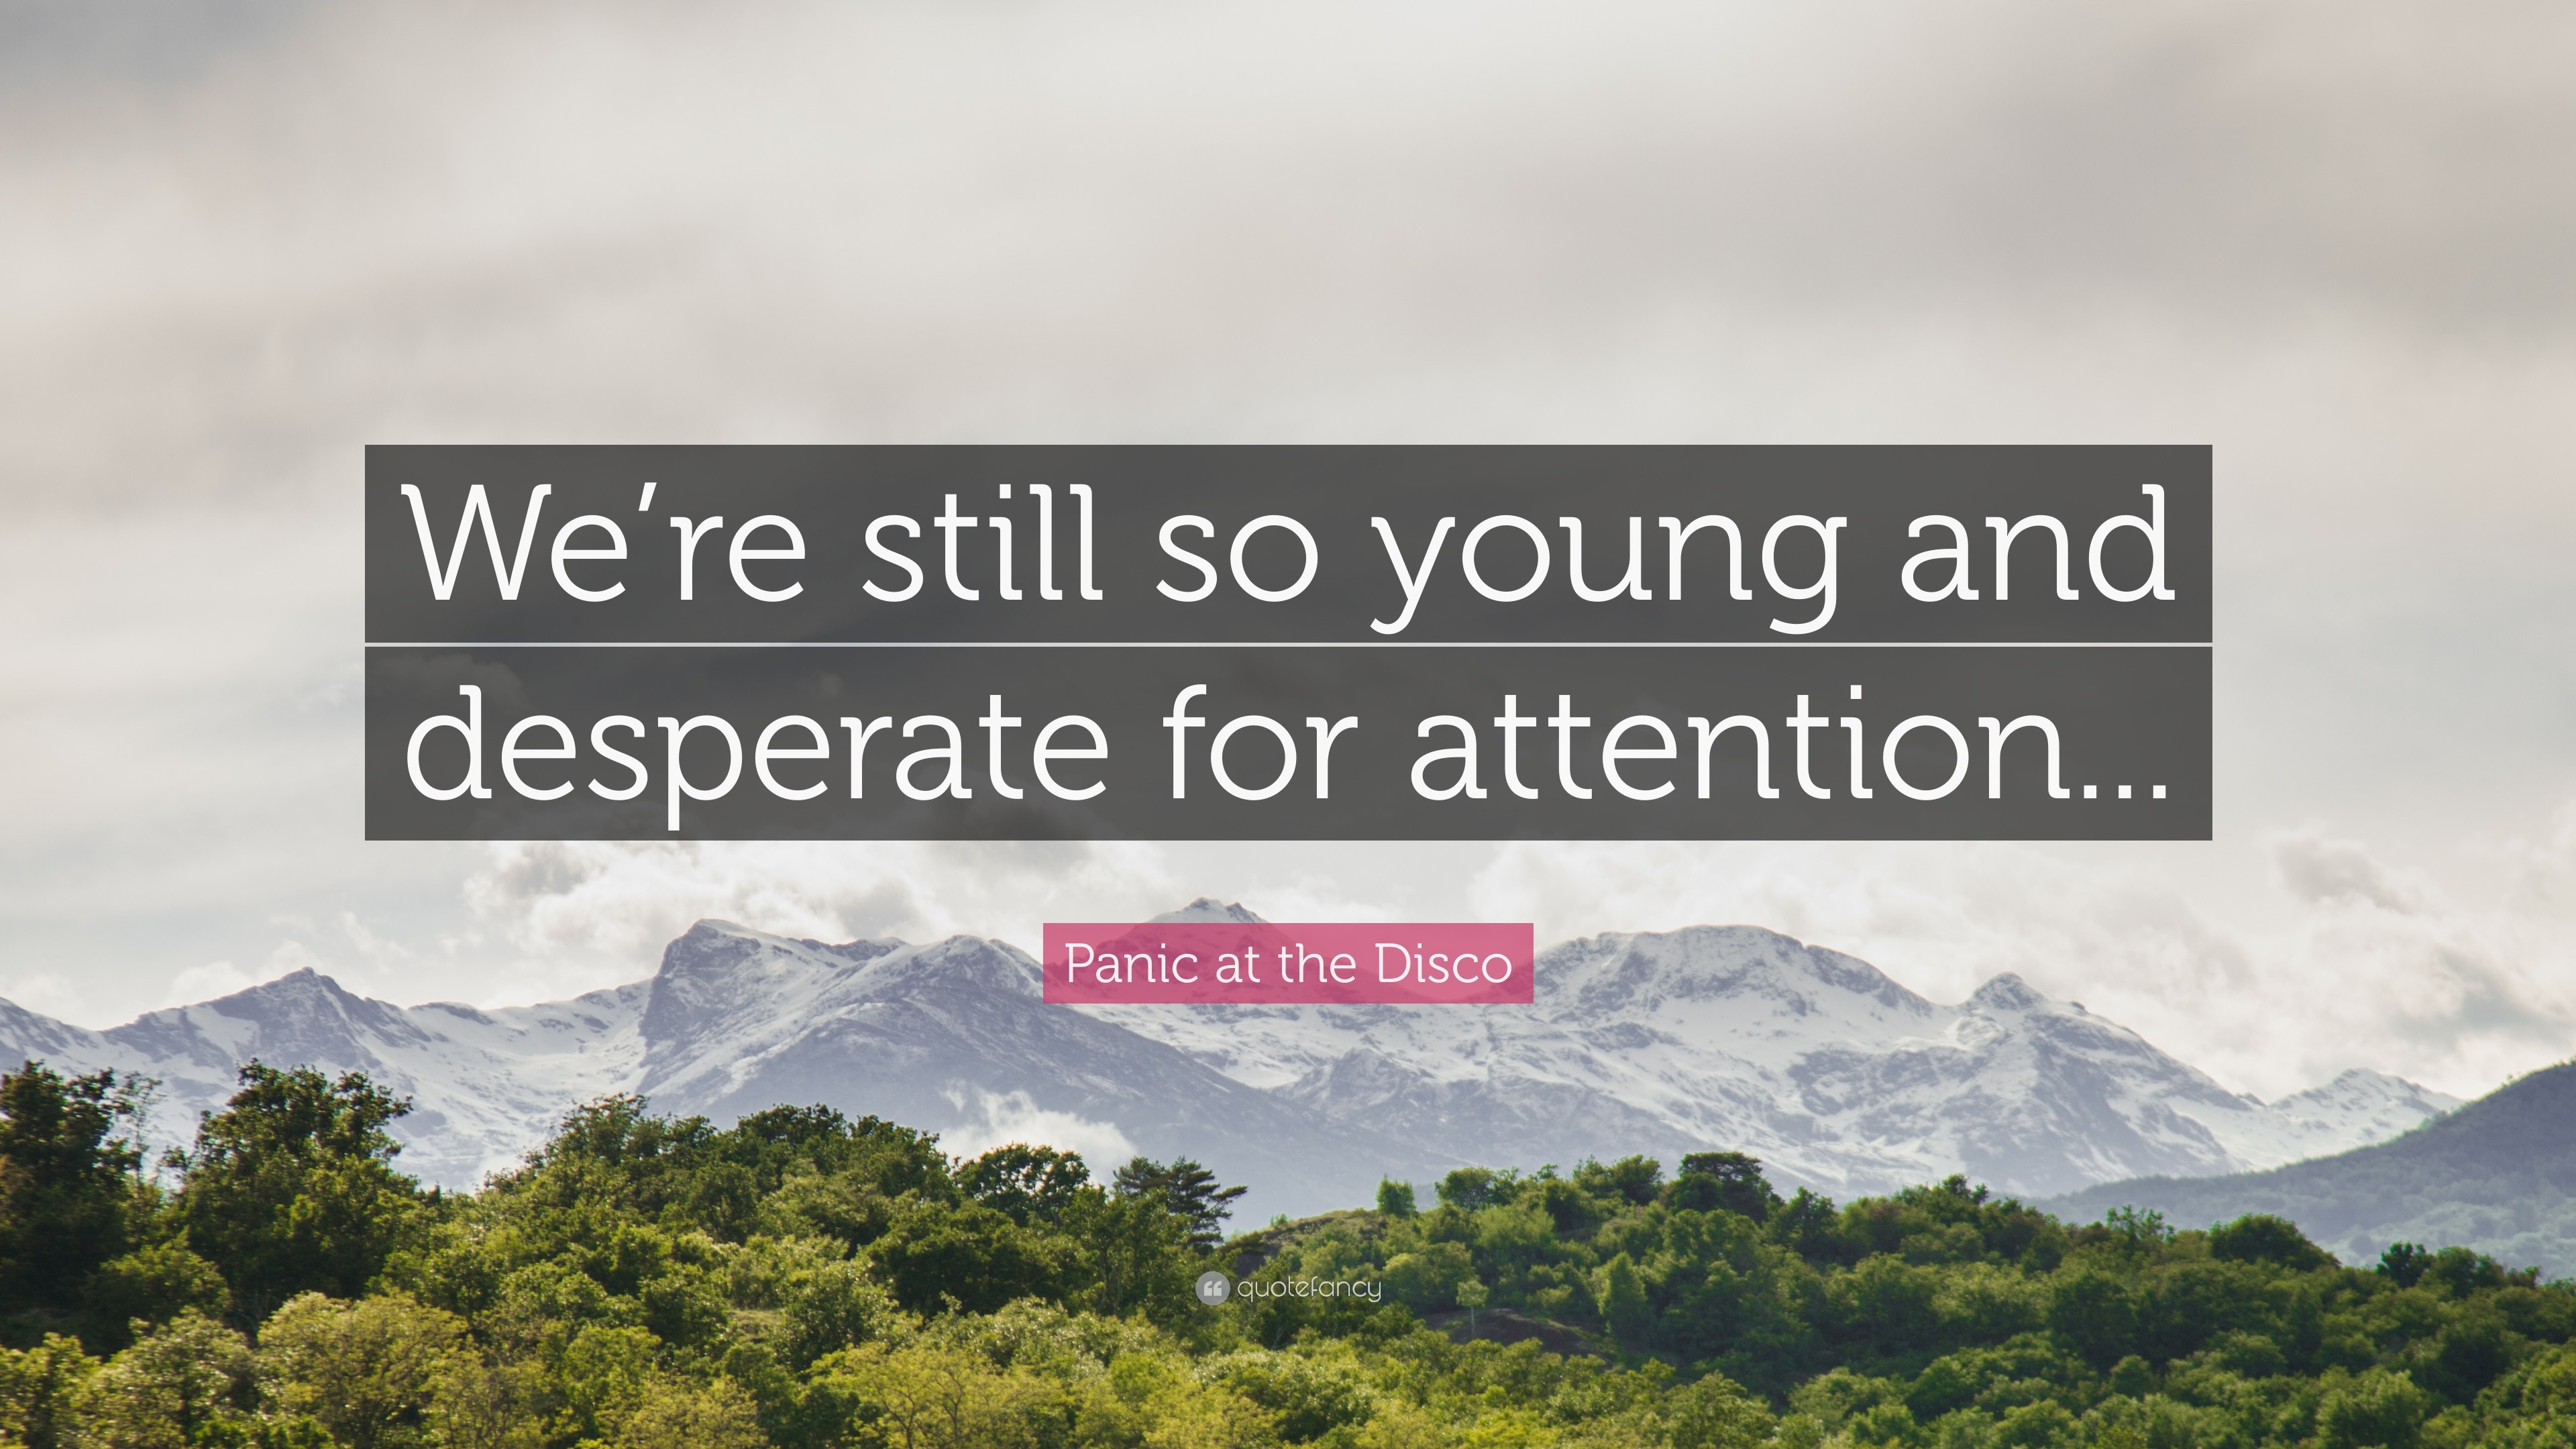 3840x2160 Panic at the Disco Quote: “We're still so young and desperate for